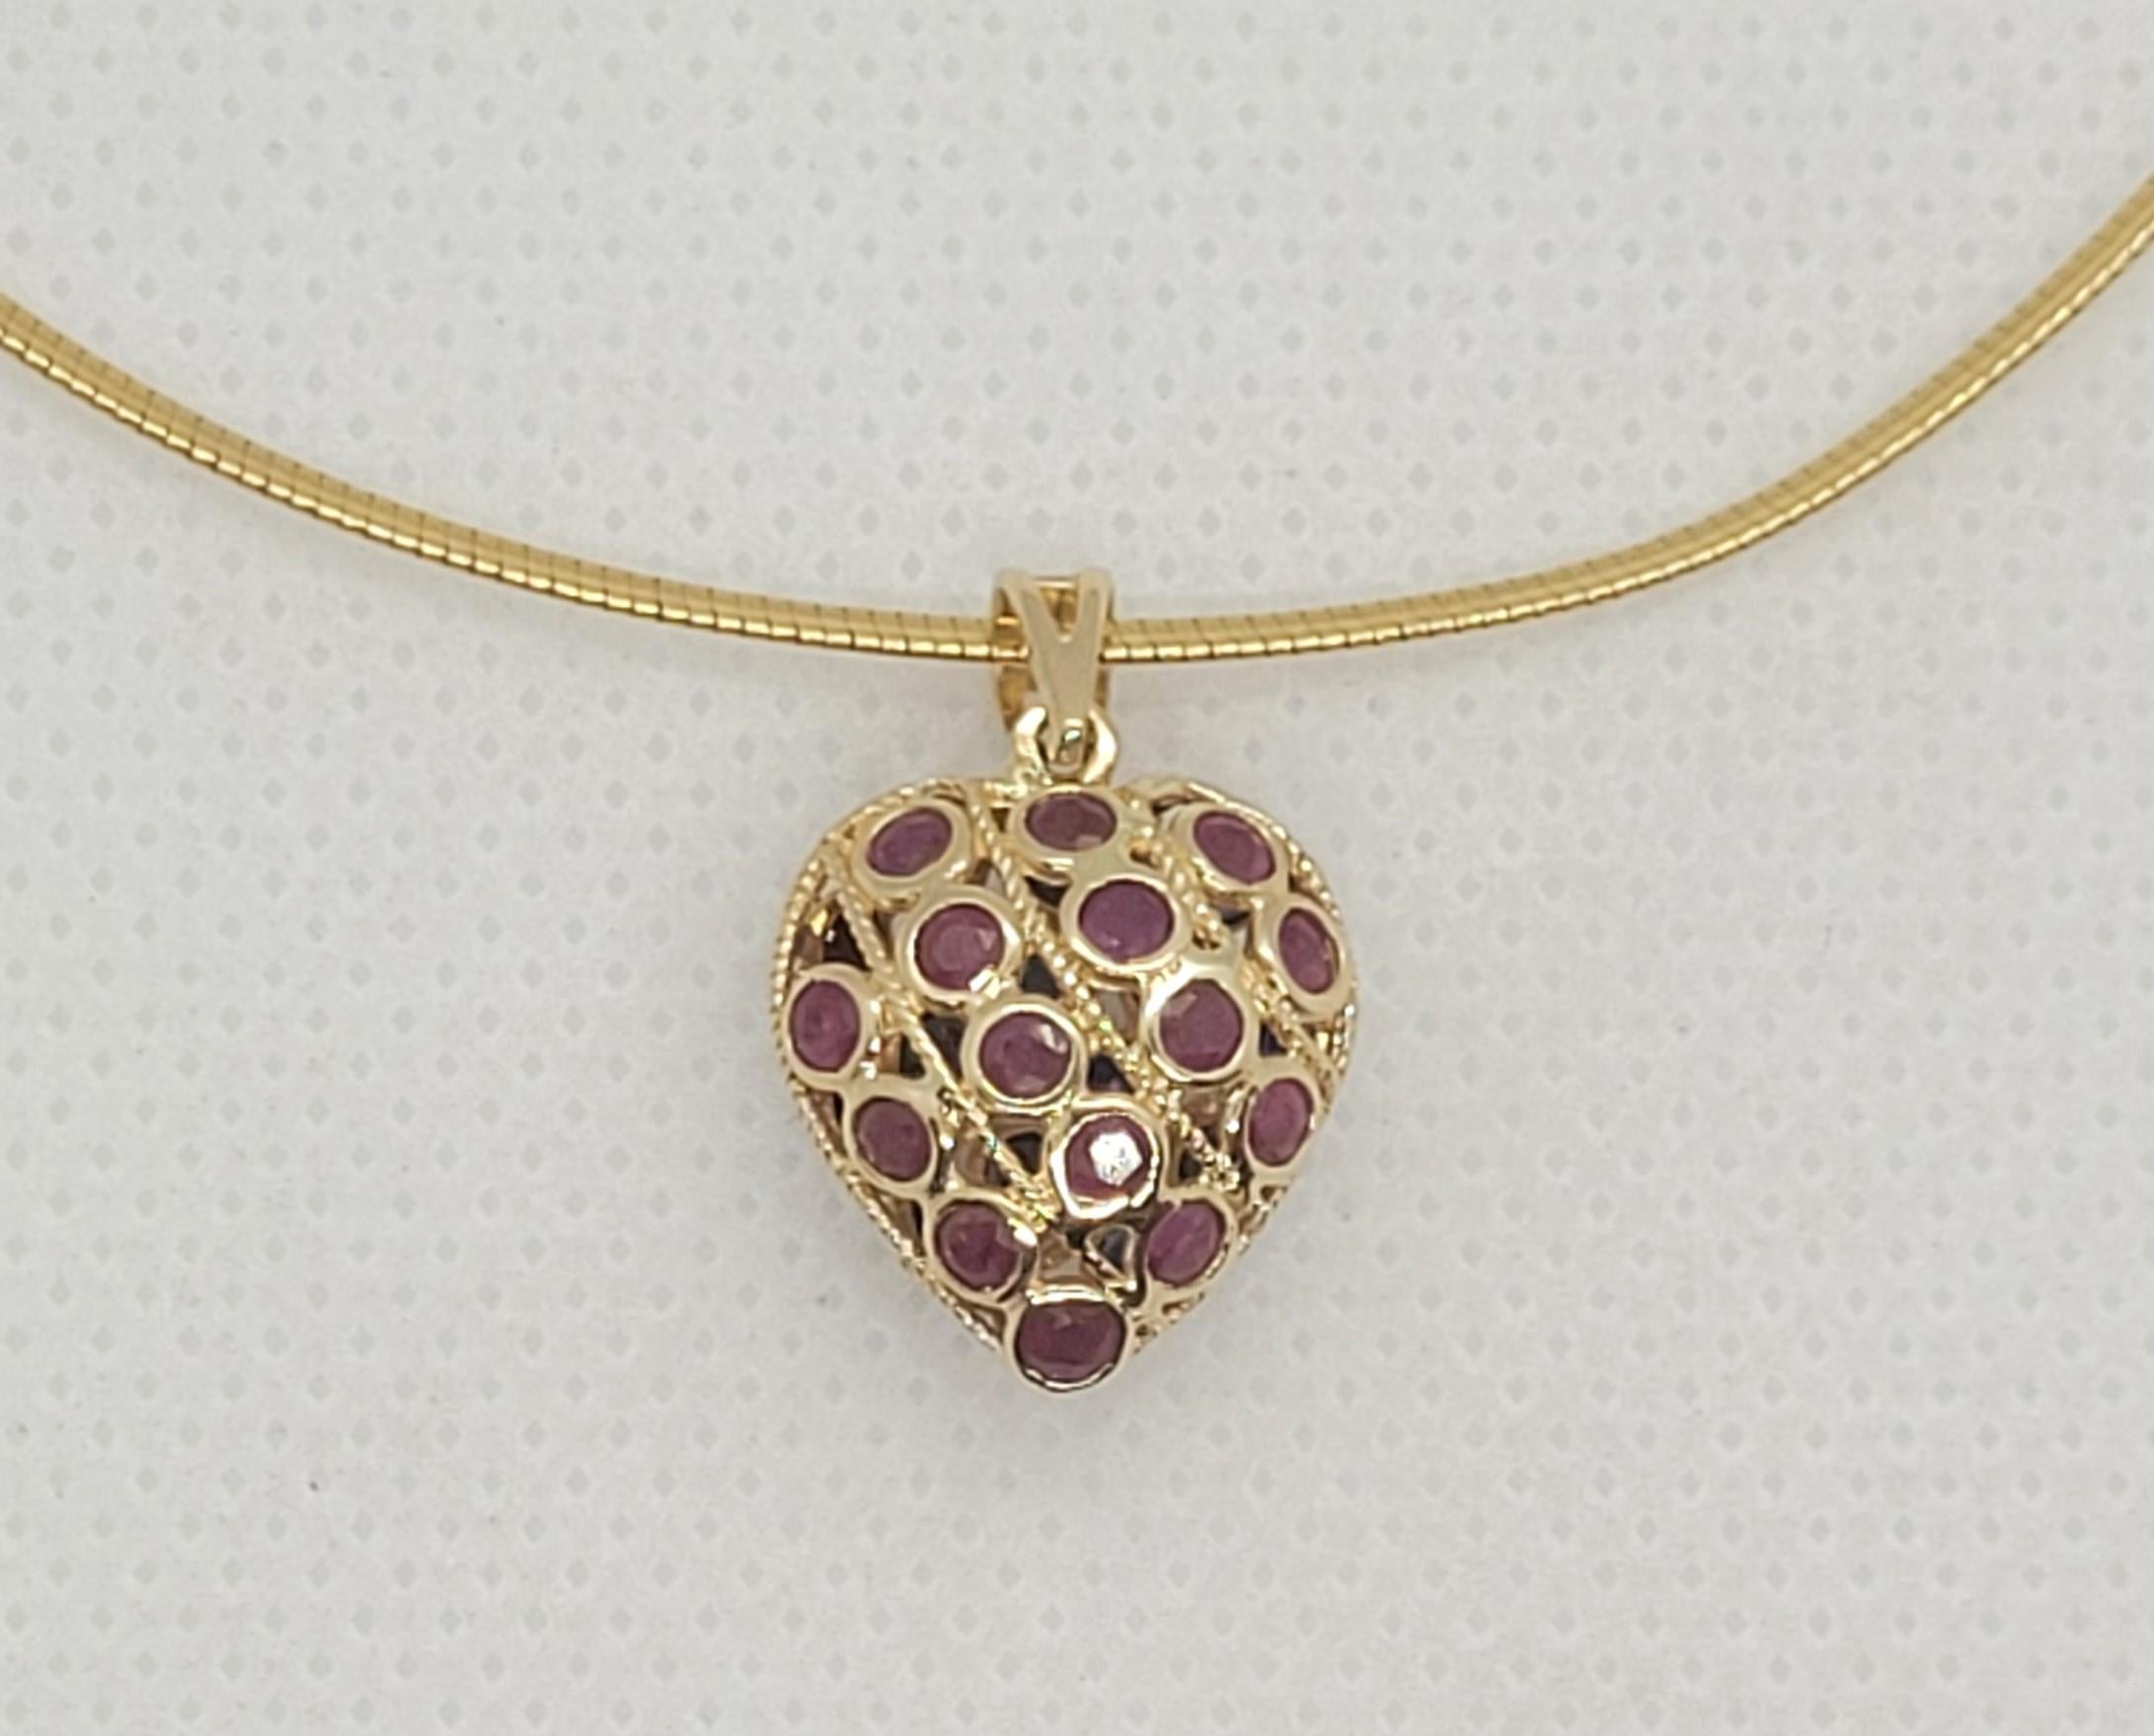 Unique 14kt yellow gold puff heart ruby sapphire pendant (reversible).  One side has bezel set round rubies and the other side has round navy blue sapphires. The pendant size is 15mm x 13mm x 8mm without the bail (bail 6mm x 3mm), weighing 1.9